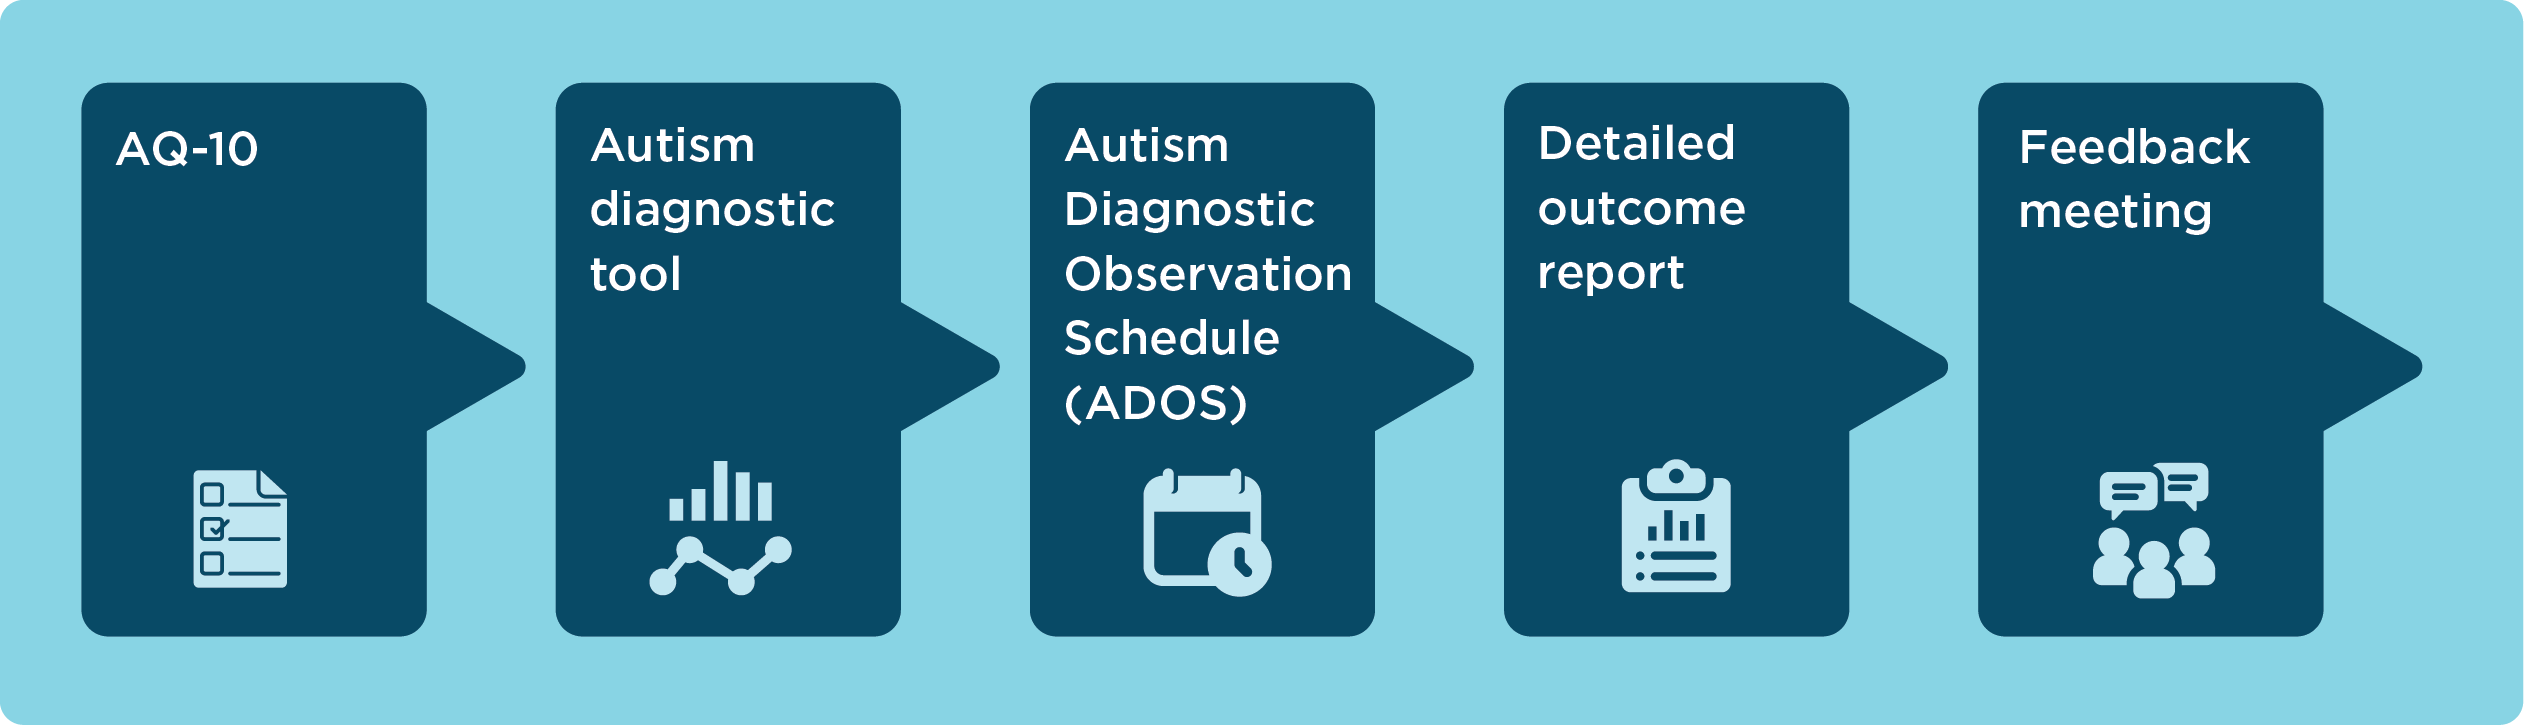 step by step autism test and asessment infographic